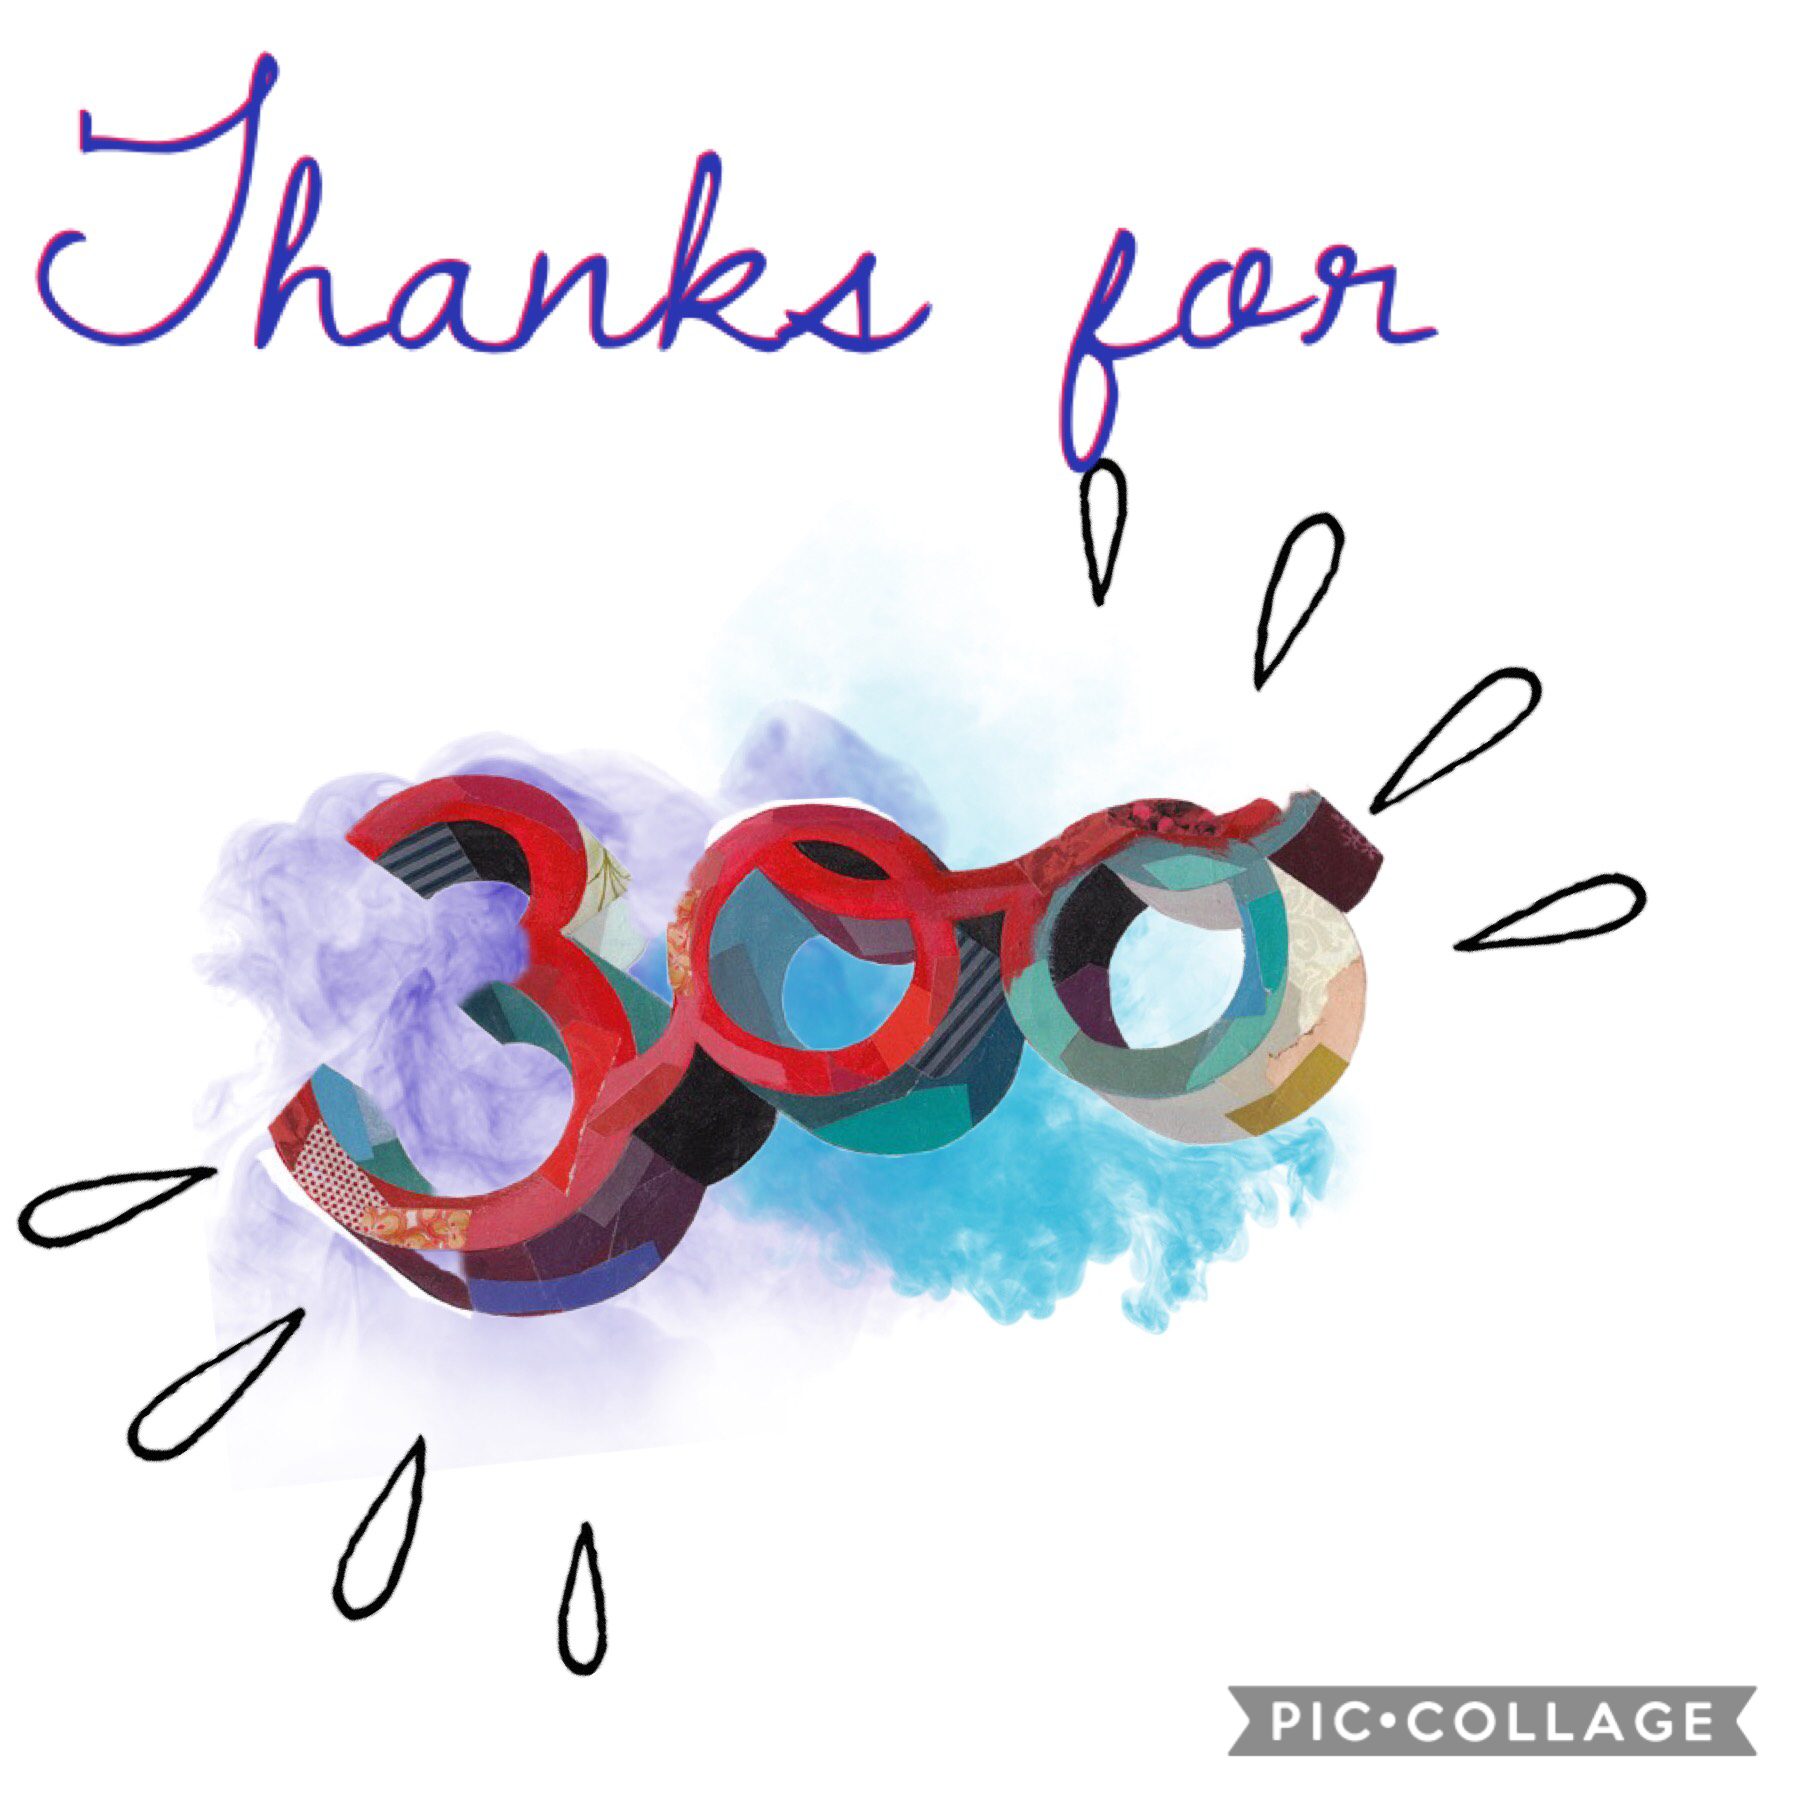 Thank everyone sm for 300 followers !! 
Stay amazing 🤪
